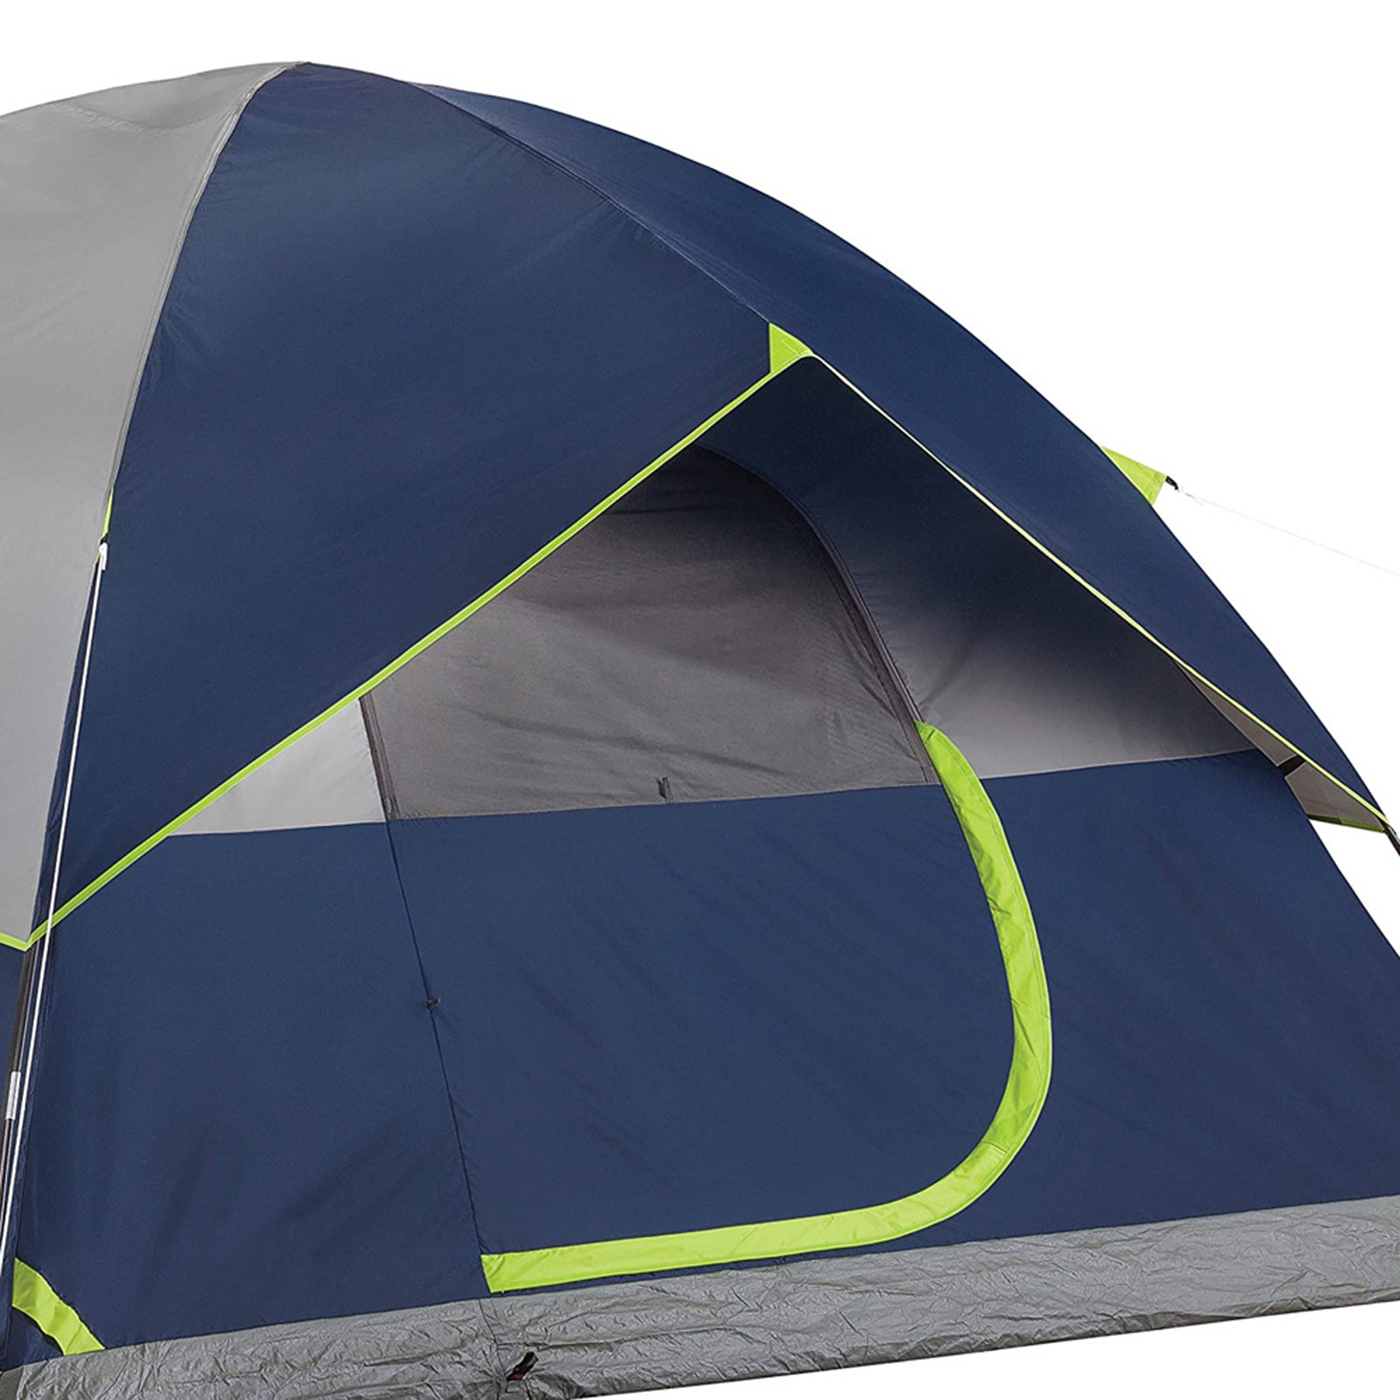 2 Person Camping Dome Tent2